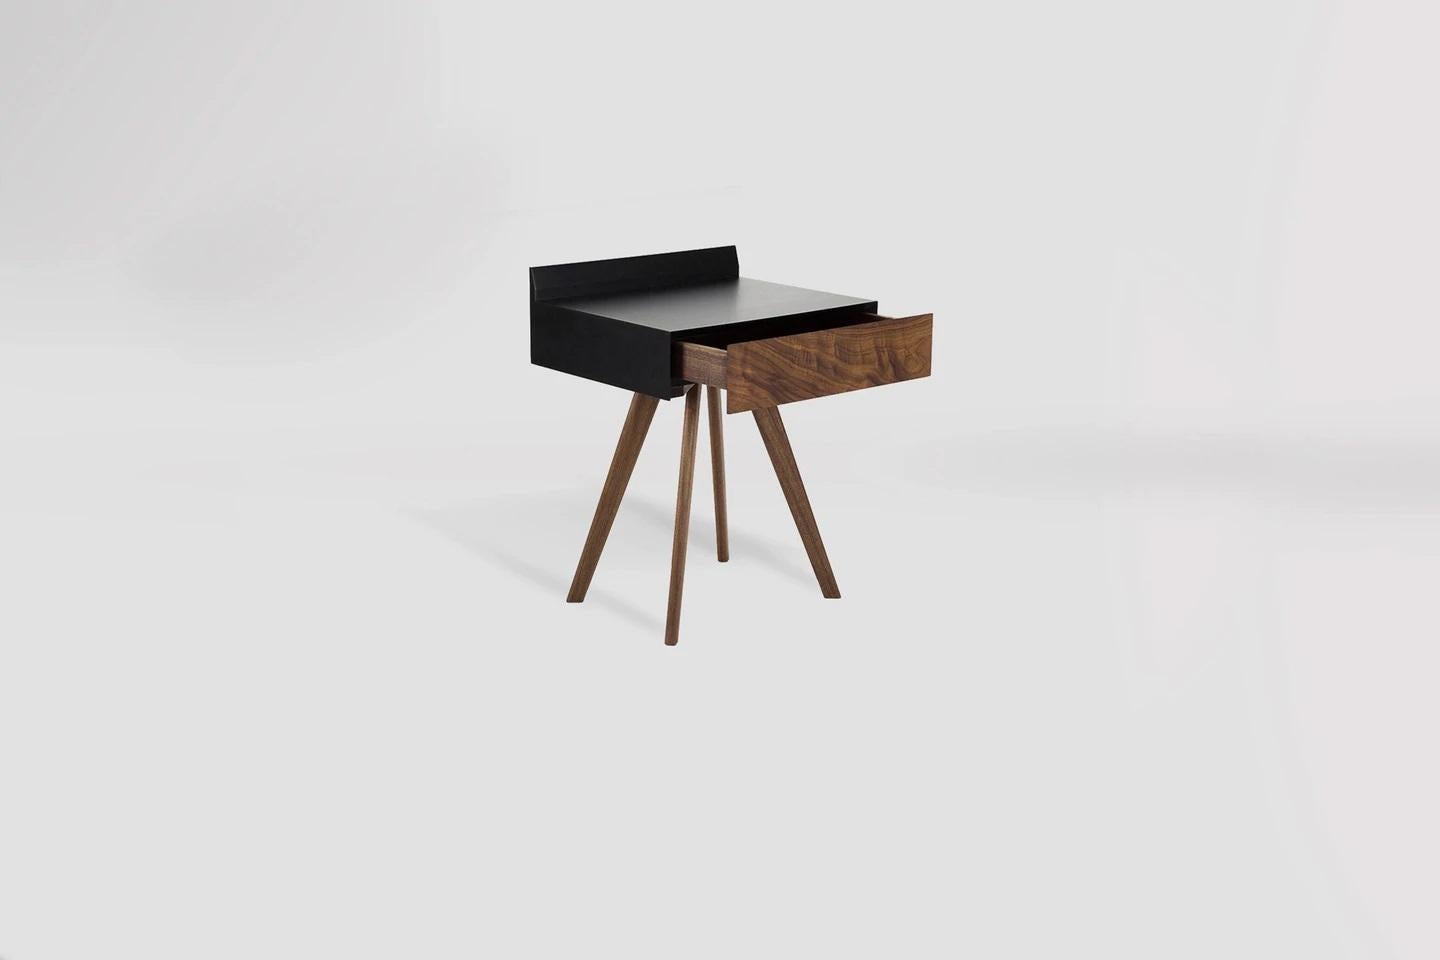 Droid night table by Atra Design
Dimensions: D 40.1x W 50 x H 76.4 cm
Materials: walnut wood

Atra Design
We are Atra, a furniture brand produced by Atra form a mexico city–based high end production facility that also houses our founder